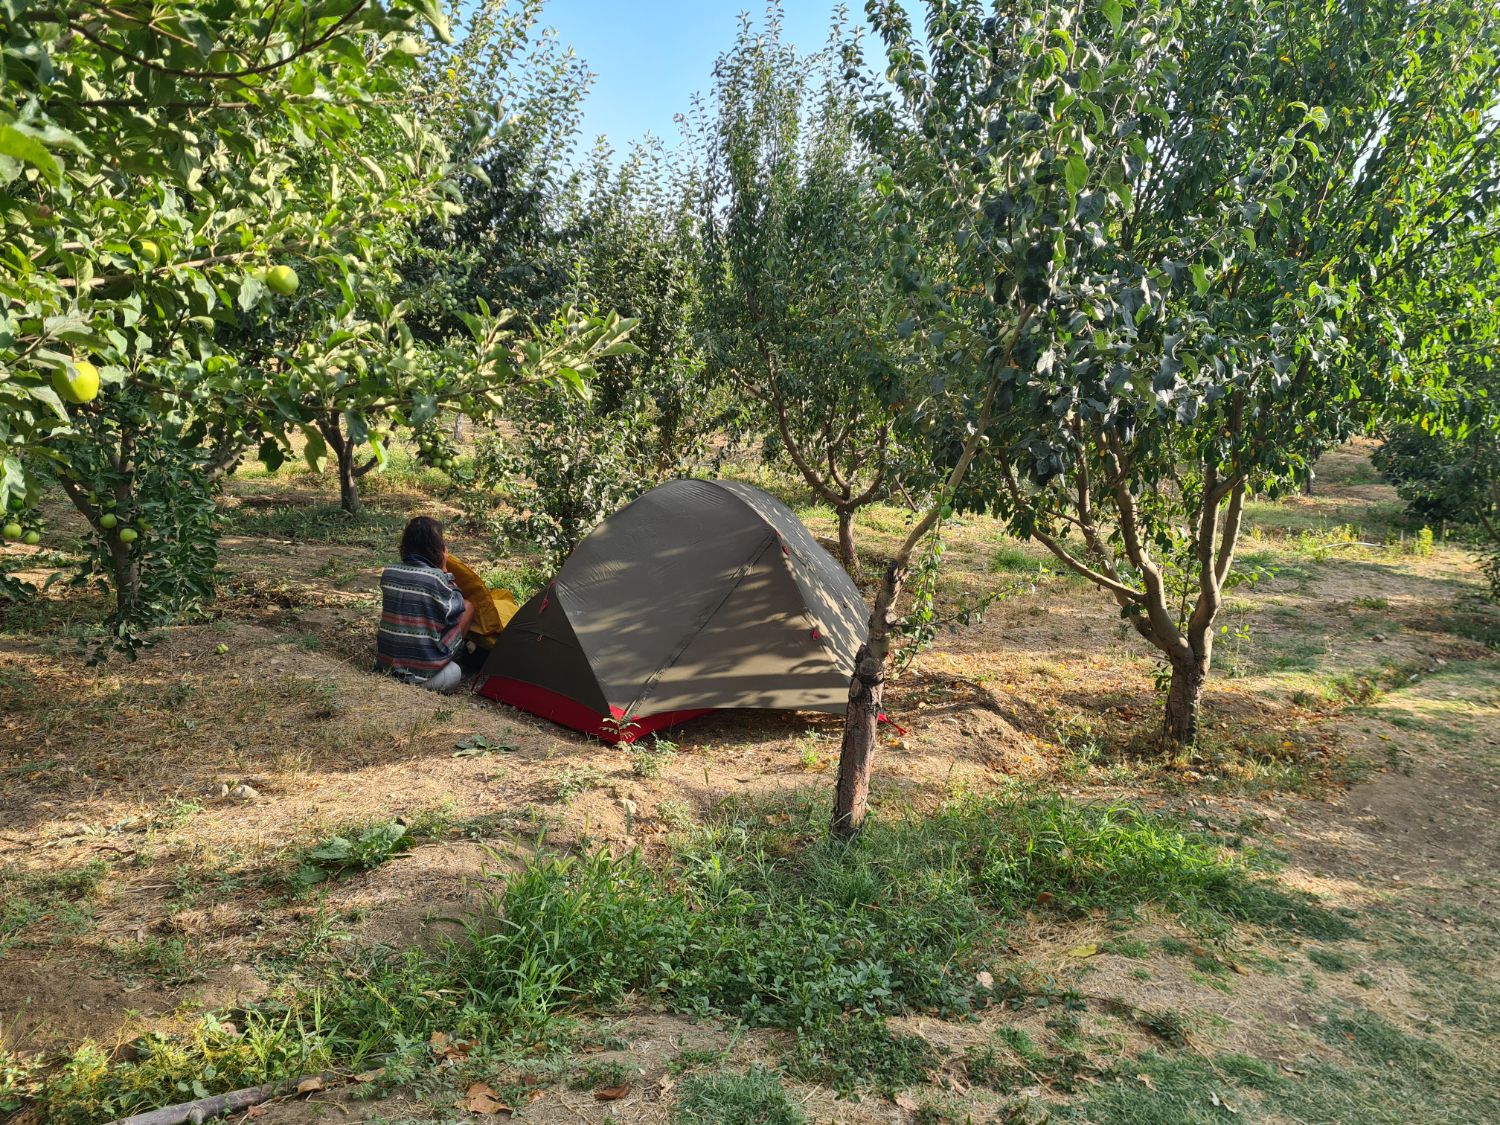 Camping in an orchard